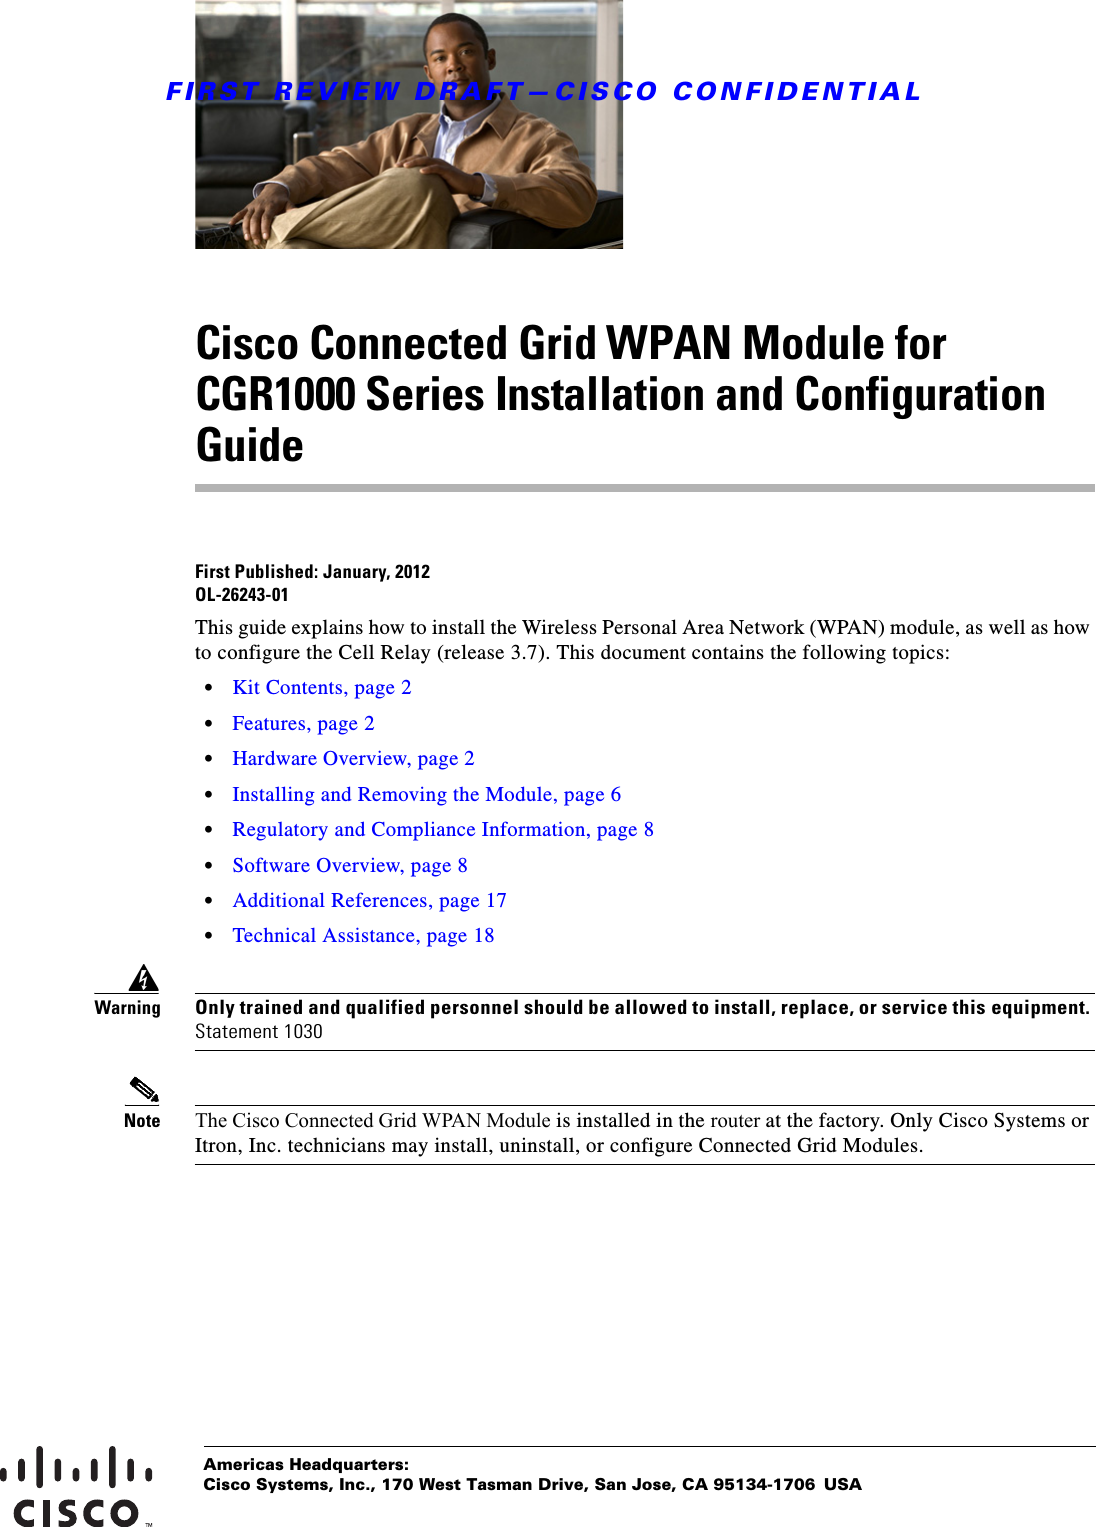 FIRST REVIEW DRAFT—CISCO CONFIDENTIALAmericas Headquarters:Cisco Systems, Inc., 170 West Tasman Drive, San Jose, CA 95134-1706 USACisco Connected Grid WPAN Module for CGR1000 Series Installation and Configuration GuideFirst Published: January, 2012OL-26243-01This guide explains how to install the Wireless Personal Area Network (WPAN) module, as well as how to configure the Cell Relay (release 3.7). This document contains the following topics:  • Kit Contents, page 2  • Features, page 2  • Hardware Overview, page 2  • Installing and Removing the Module, page 6  • Regulatory and Compliance Information, page 8  • Software Overview, page 8  • Additional References, page 17  • Technical Assistance, page 18WarningOnly trained and qualified personnel should be allowed to install, replace, or service this equipment. Statement 1030Note The Cisco Connected Grid WPAN Module is installed in the router at the factory. Only Cisco Systems or Itron, Inc. technicians may install, uninstall, or configure Connected Grid Modules.